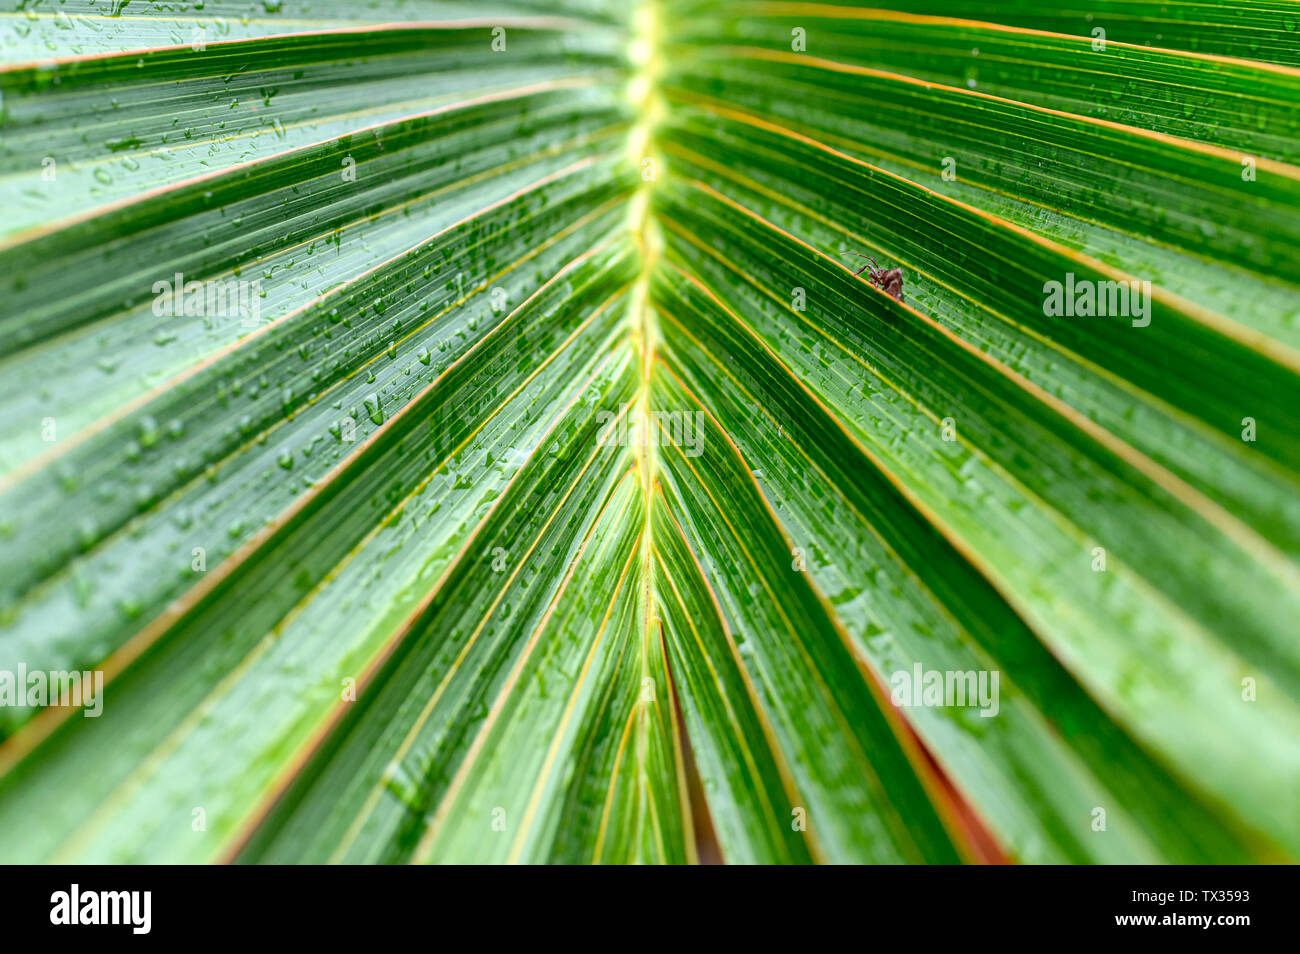 Close-up Palm leaves with striped a natural green background Stock Photo